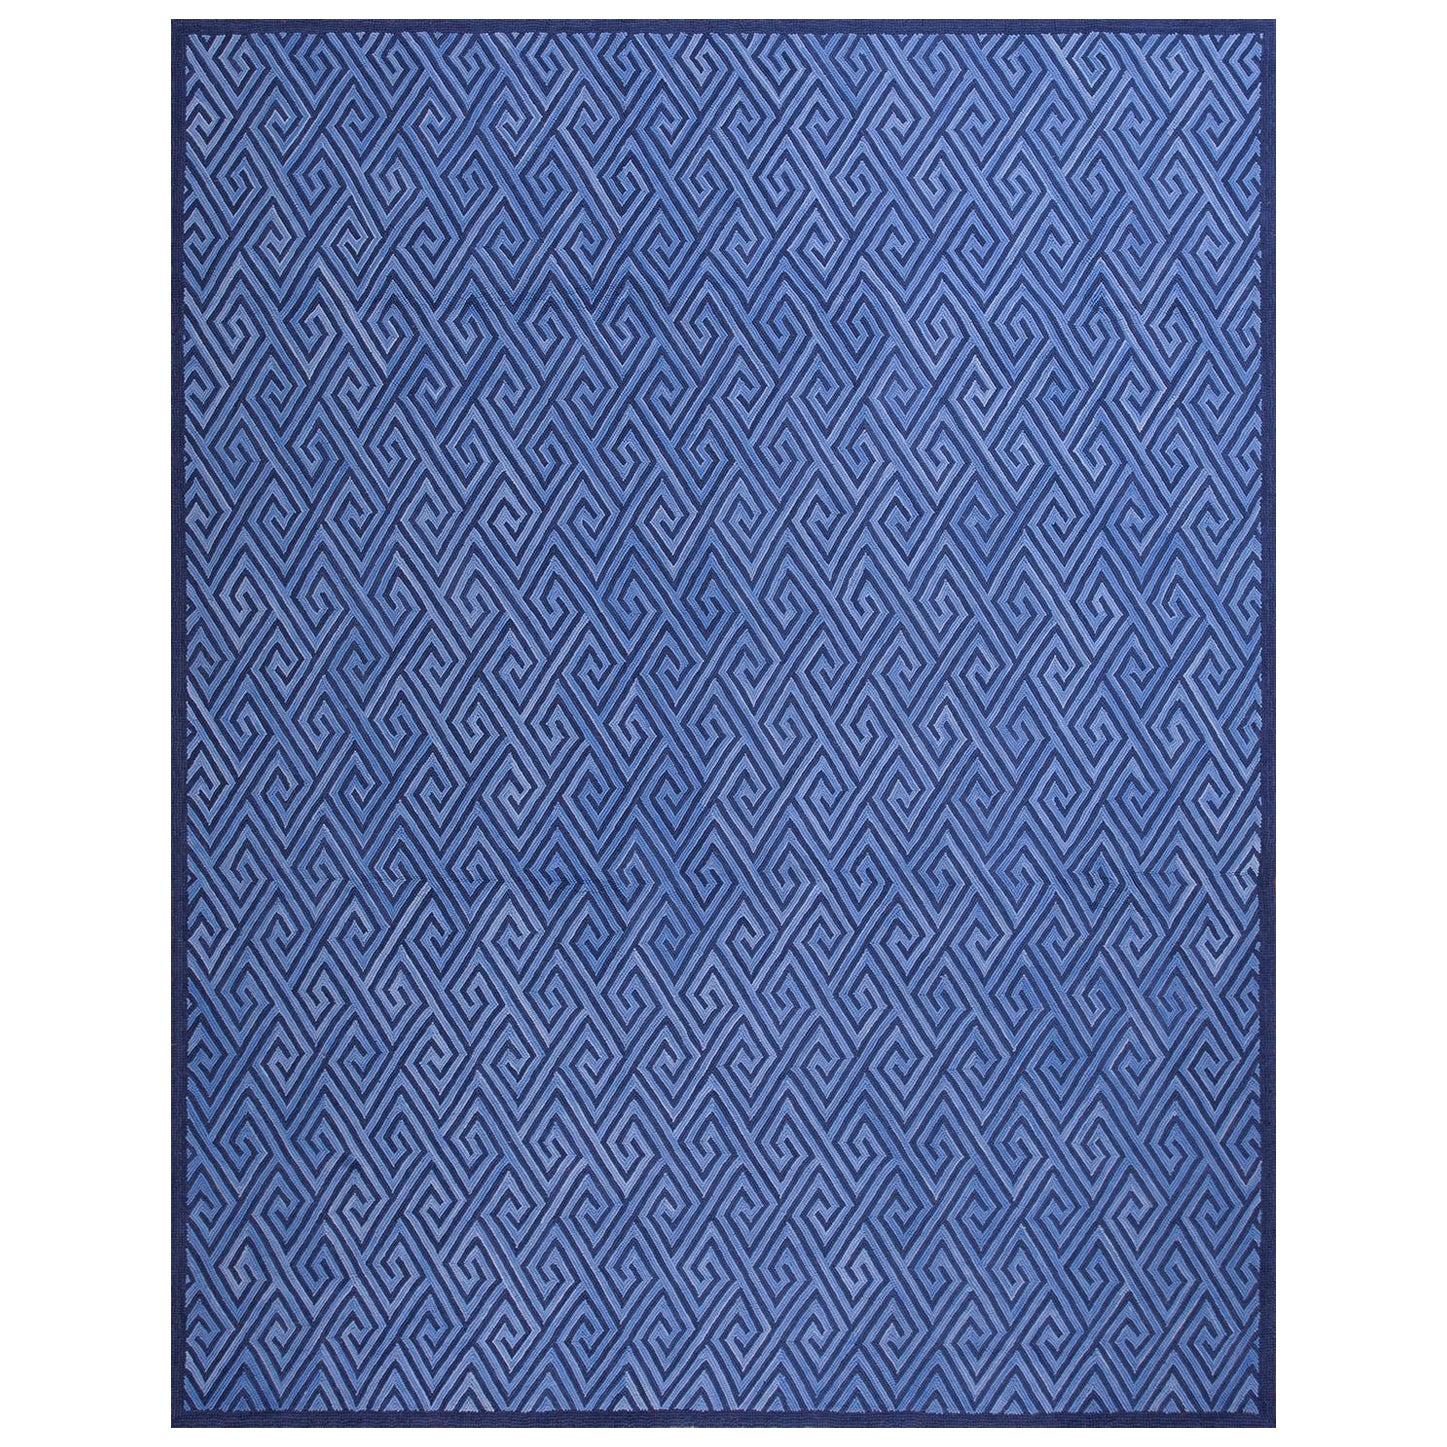 Contemporary American Hooked Rug (8' x 10' - 243 x 304 ) For Sale